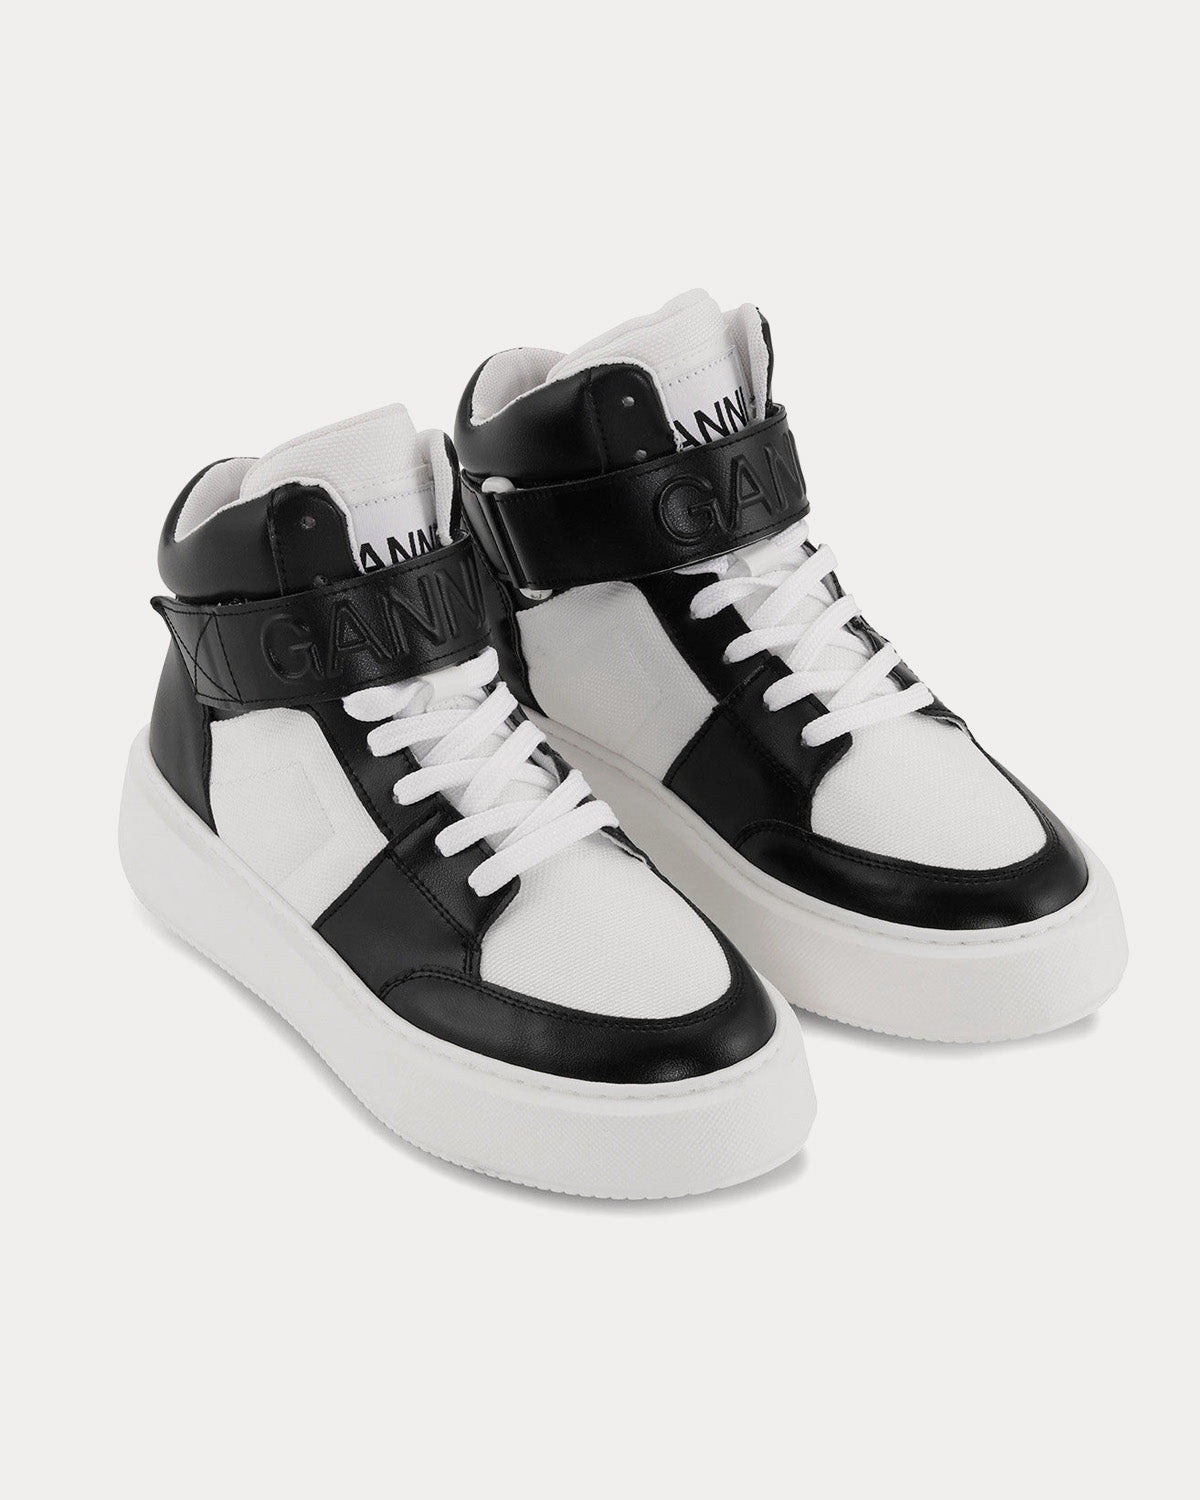 Ganni - Sporty Mix Black / White High Top Sneakers